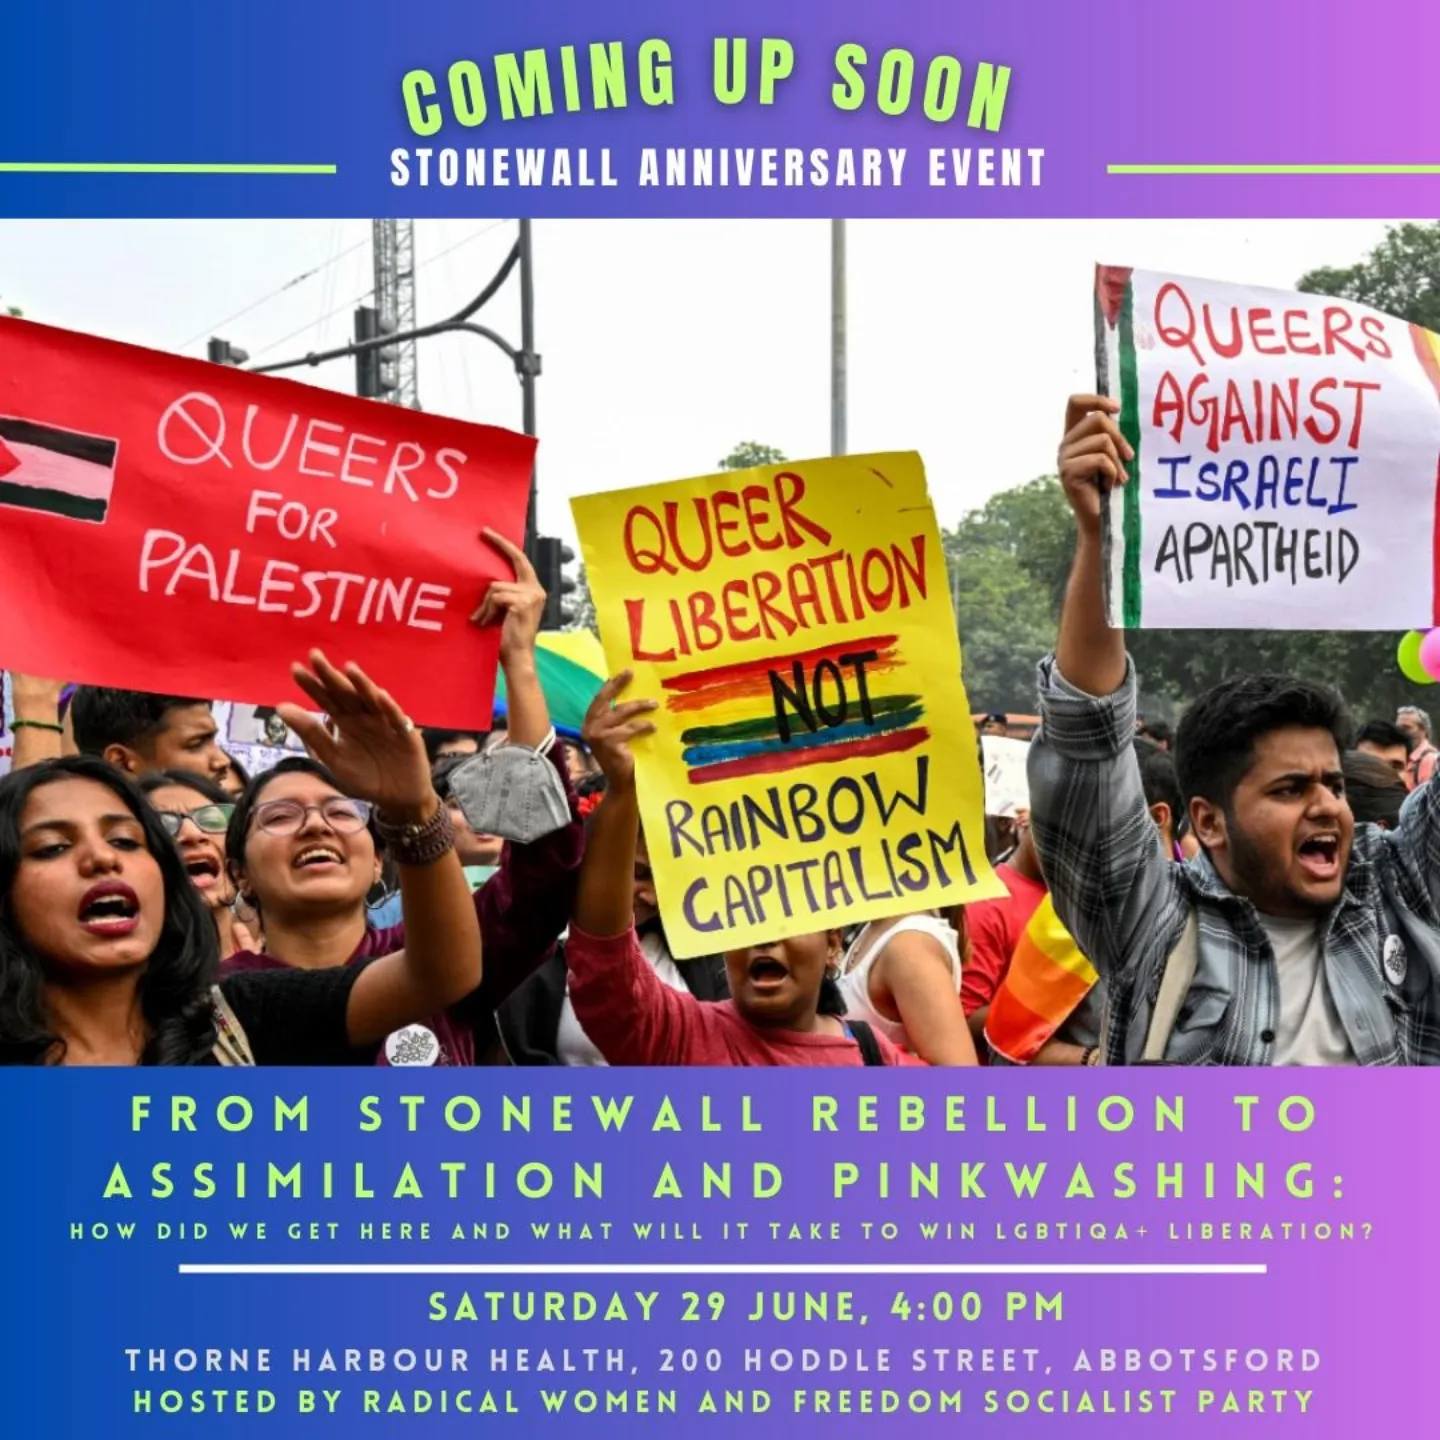 From Stonewall Rebellion to Assimilation and Pinkwashing event image